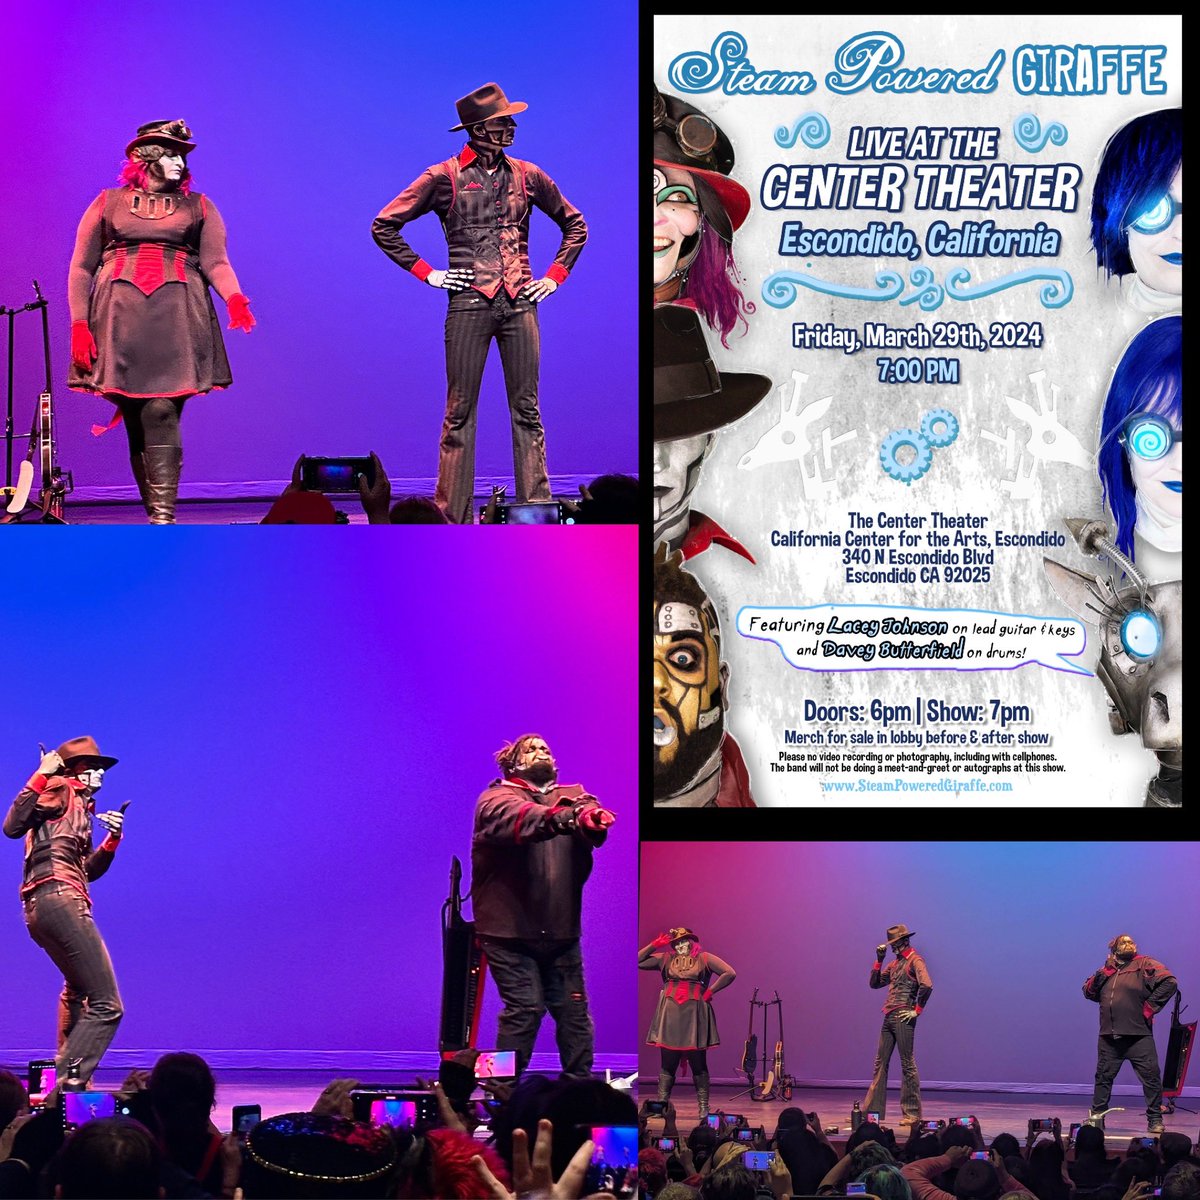 Steam Powered Giraffe is back on stage this Friday March 29th at The Center Theater at the California Center for the Arts, Escondido! There are still a few seats left for the show. artcenter.org/event/steam-po…